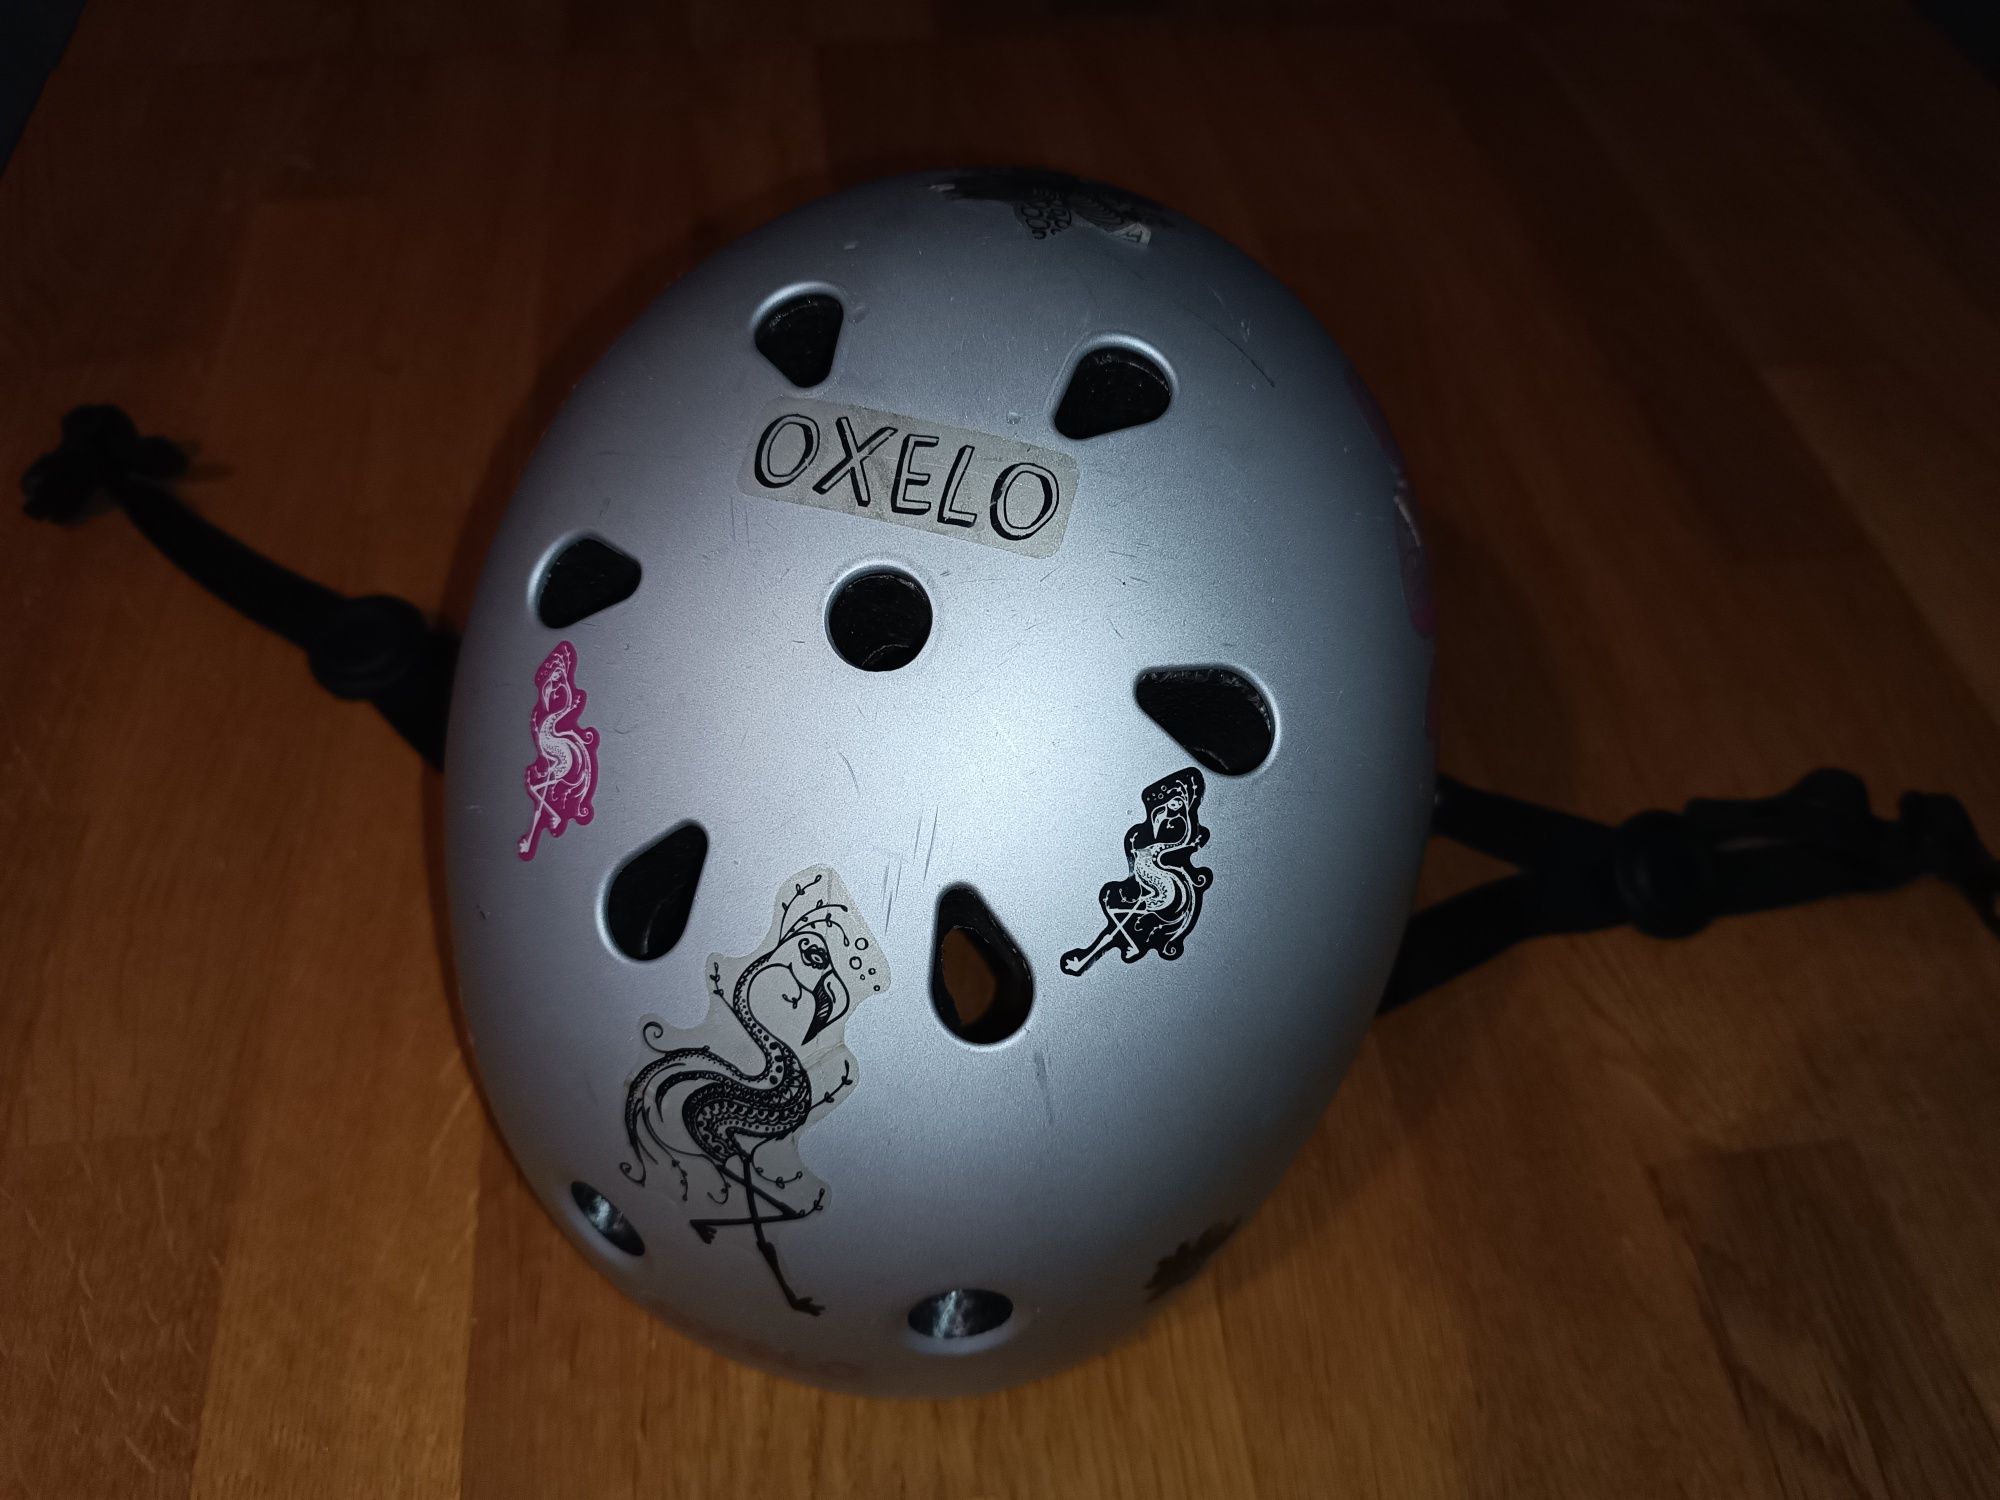 Kask oxelo play 5 gray 50-54 cm